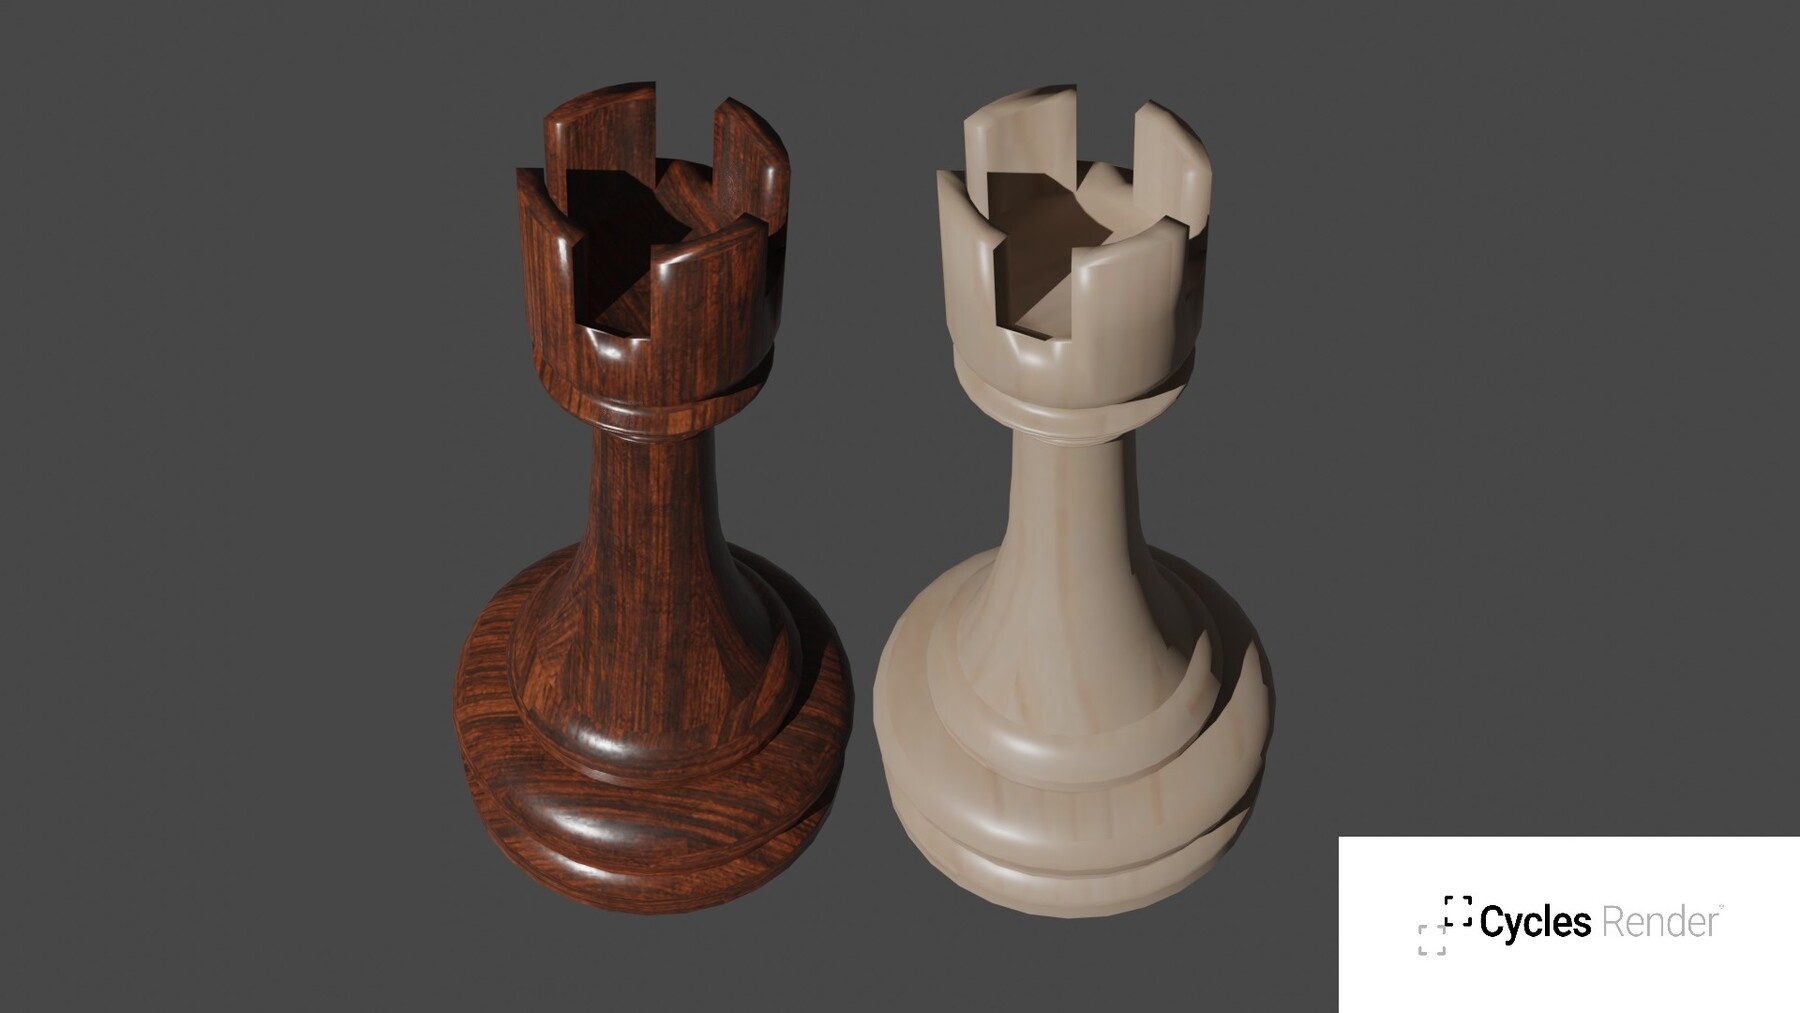 Rook Chess Piece #1 Wood Print by Ktsdesign - Science Photo Gallery